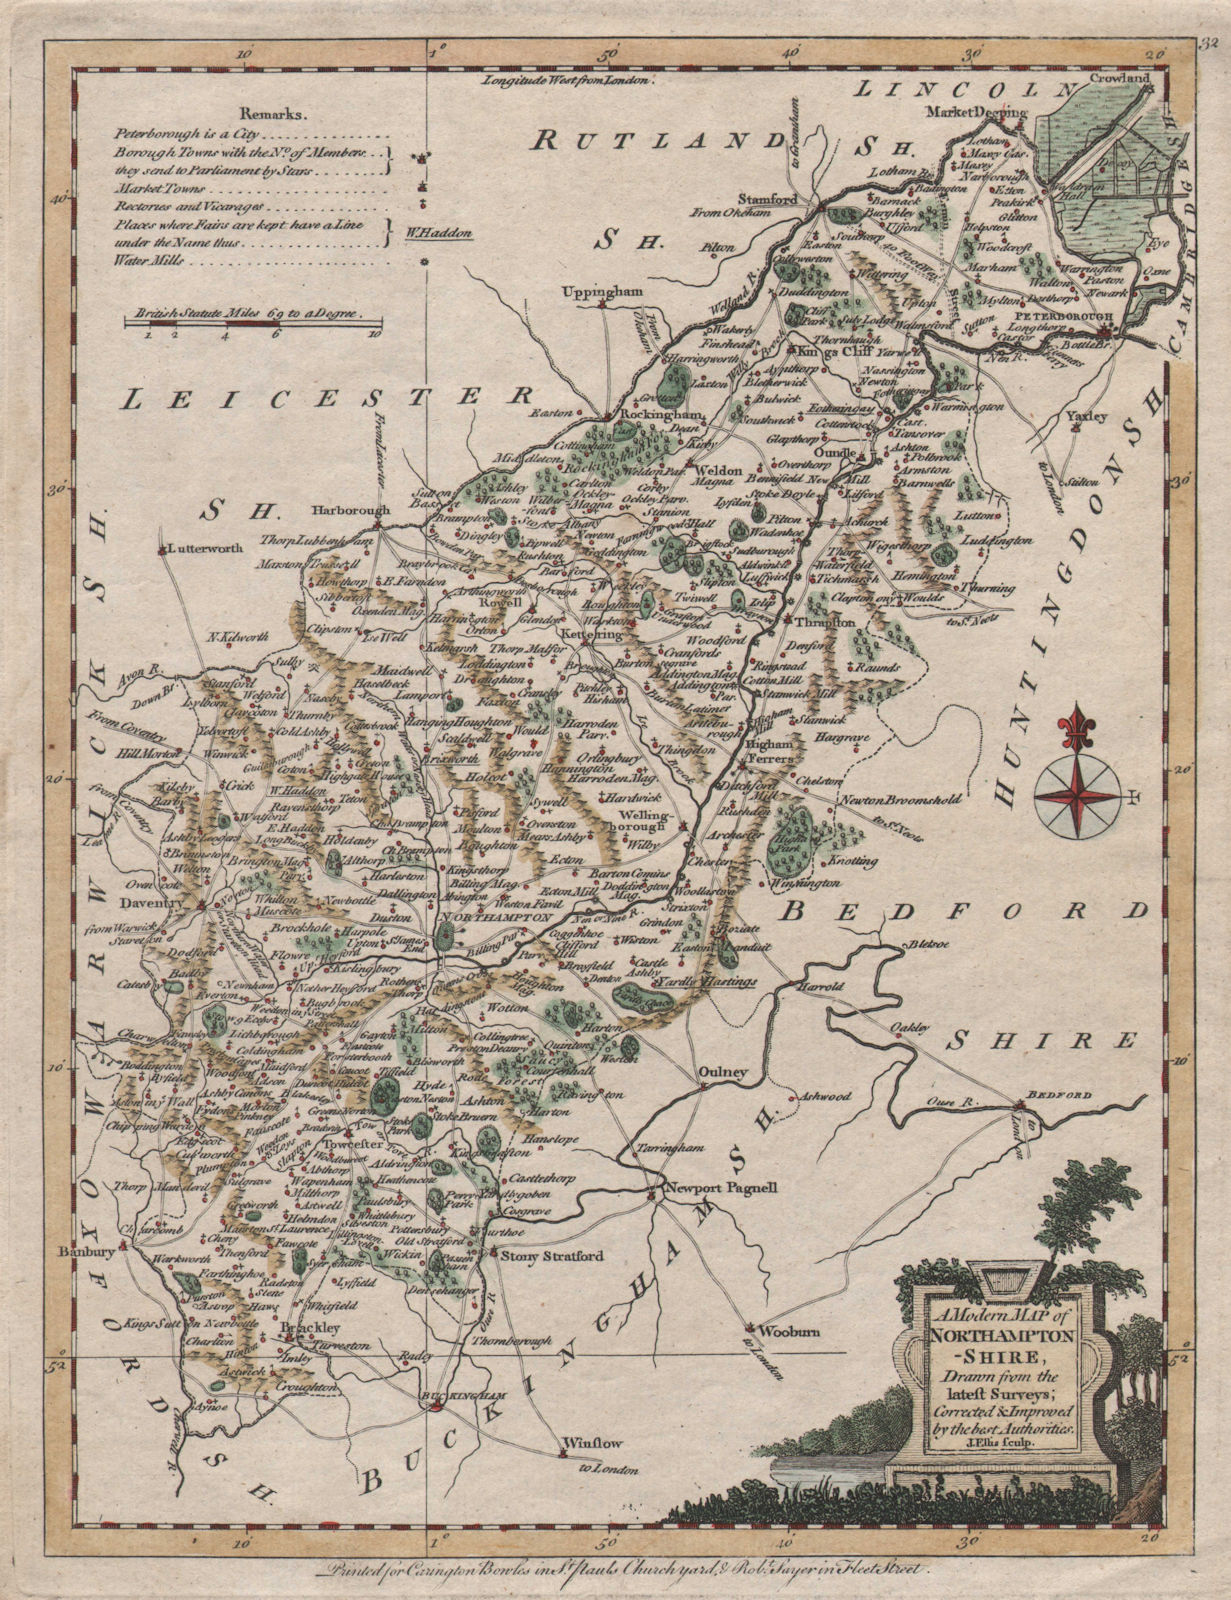 "A modern map of Northamptonshire drawn from the latest surveys". ELLIS 1766